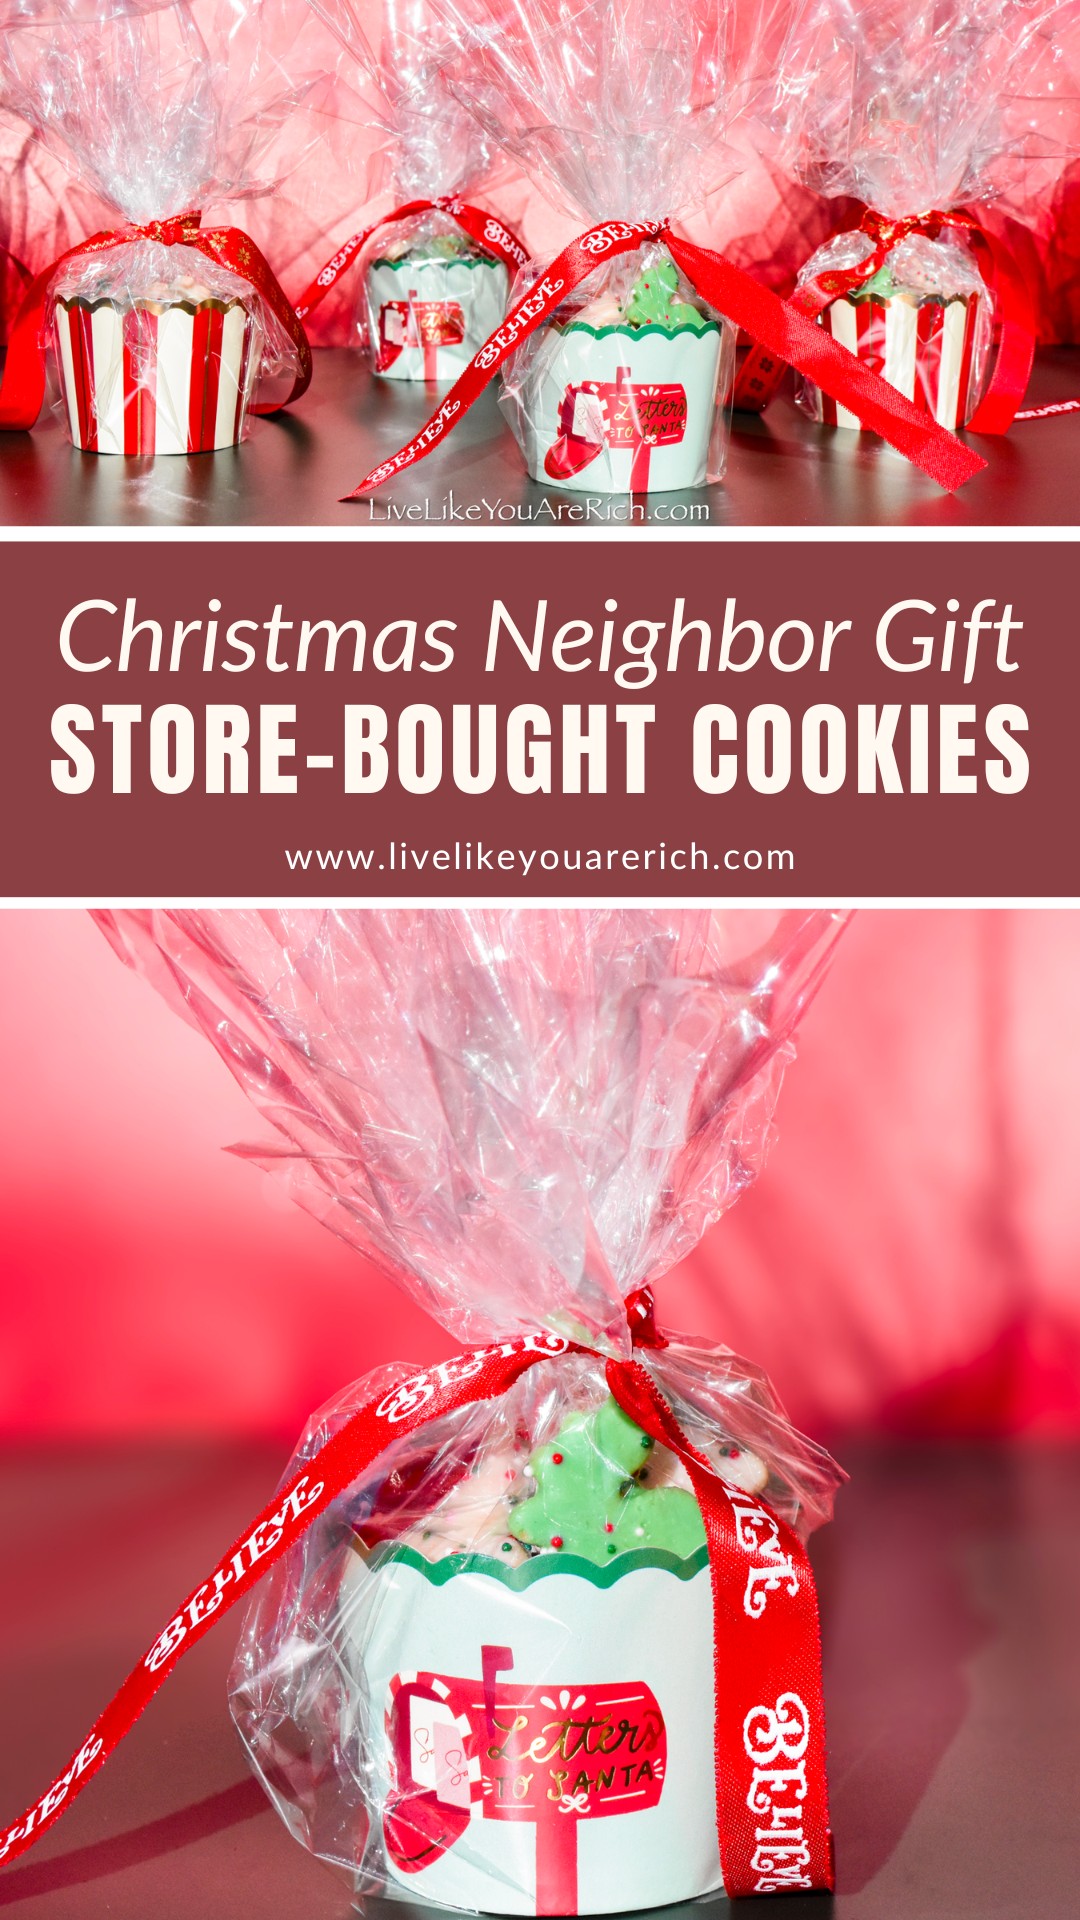 Neighbor Christmas Gift: Store-Bought Cookies